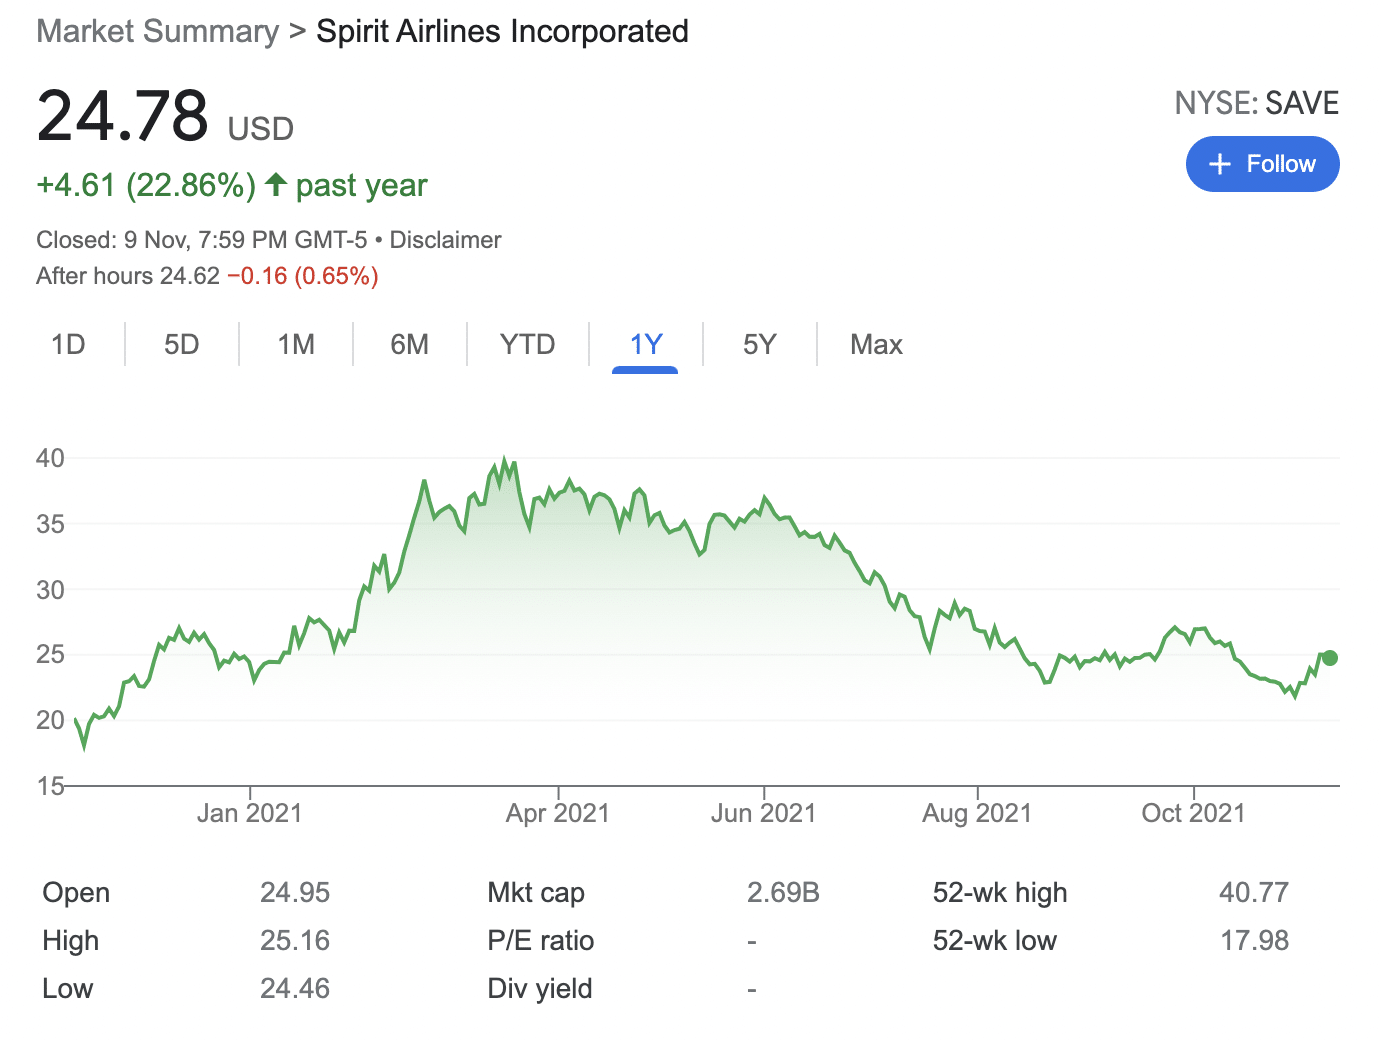 In terms of its current share price action, Spirit Airlines is up over 22% year-to-date. The stocks did, however, surpass a value of $40 in mid-2021. As such, at current prices of $24-ish, this represents an attractive upside of over 66% in the short-to-medium term.